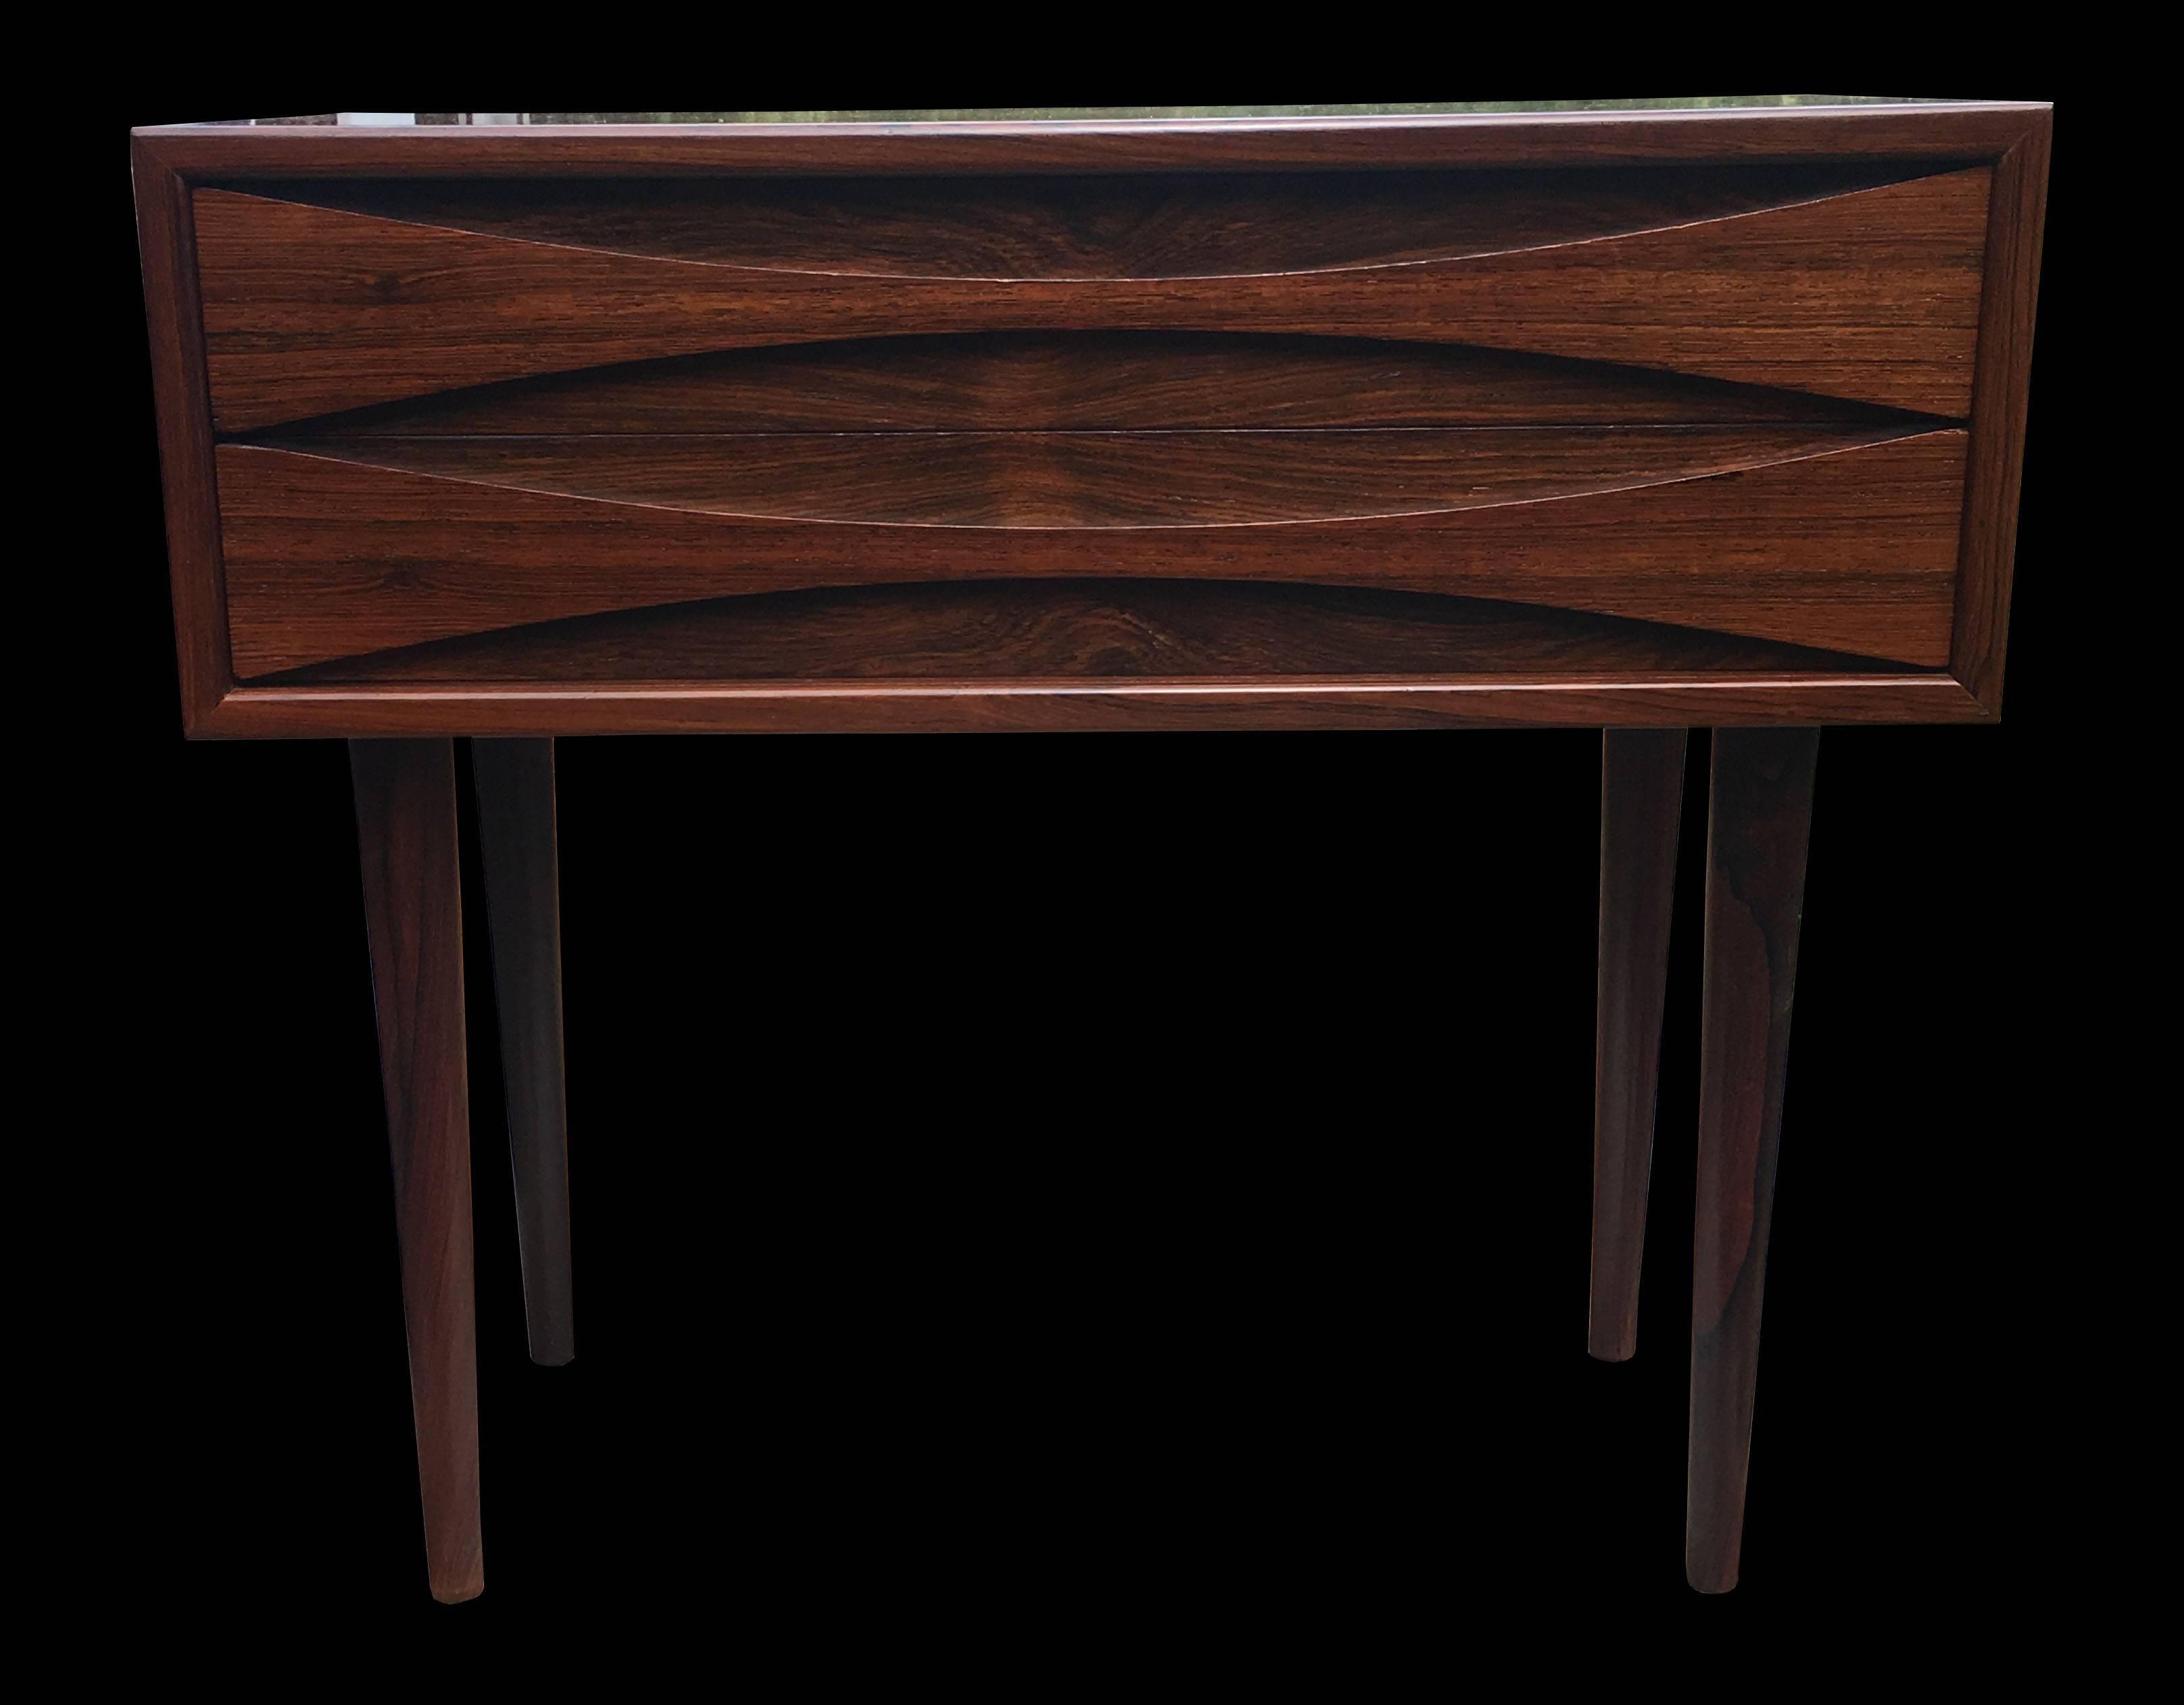 An unusual 60 cm wide version of this highly priced item by Arne Vodder in very nicely figured rosewood and in great condition.